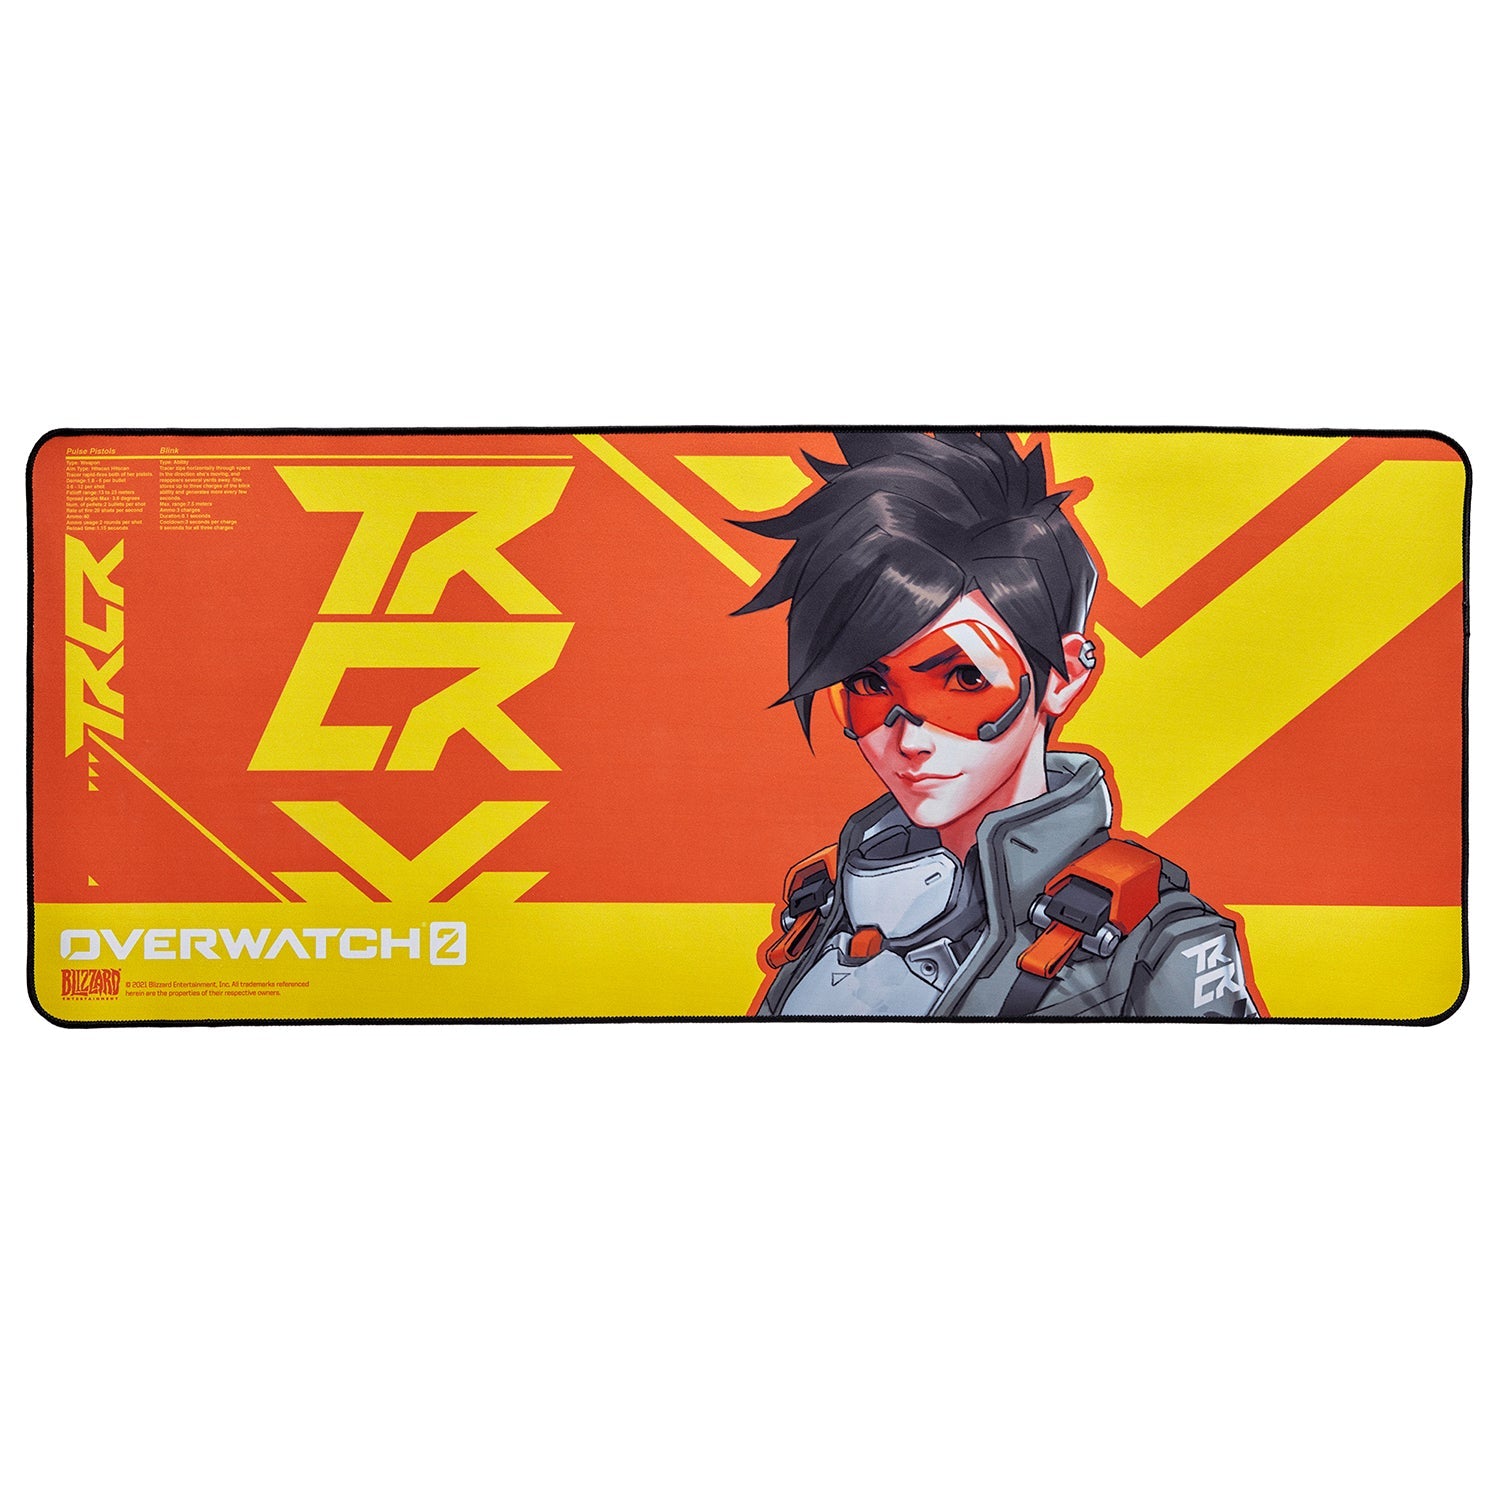 Overwatch 2 Tracer Gaming Desk Mat in Orange - Front View